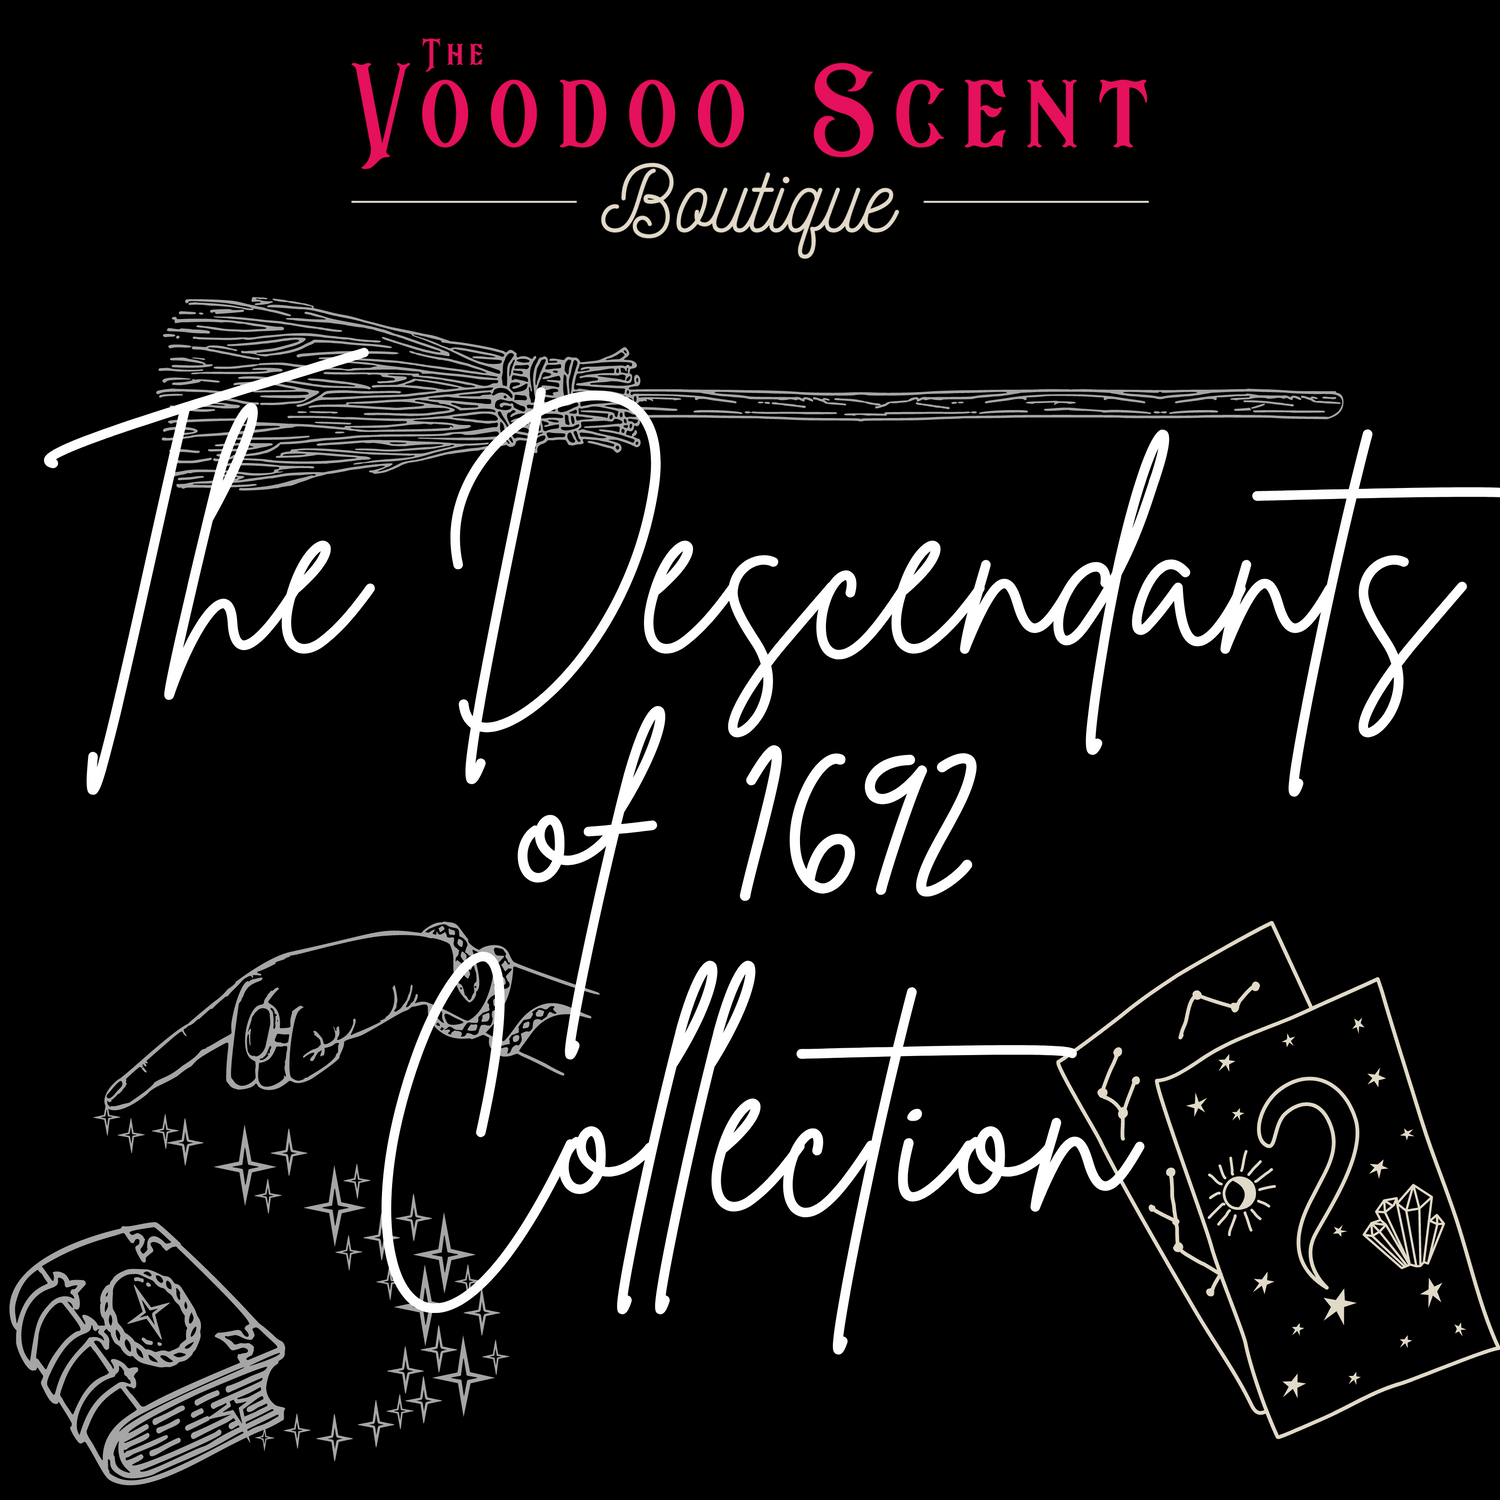 The Descendants of 1692 Collection